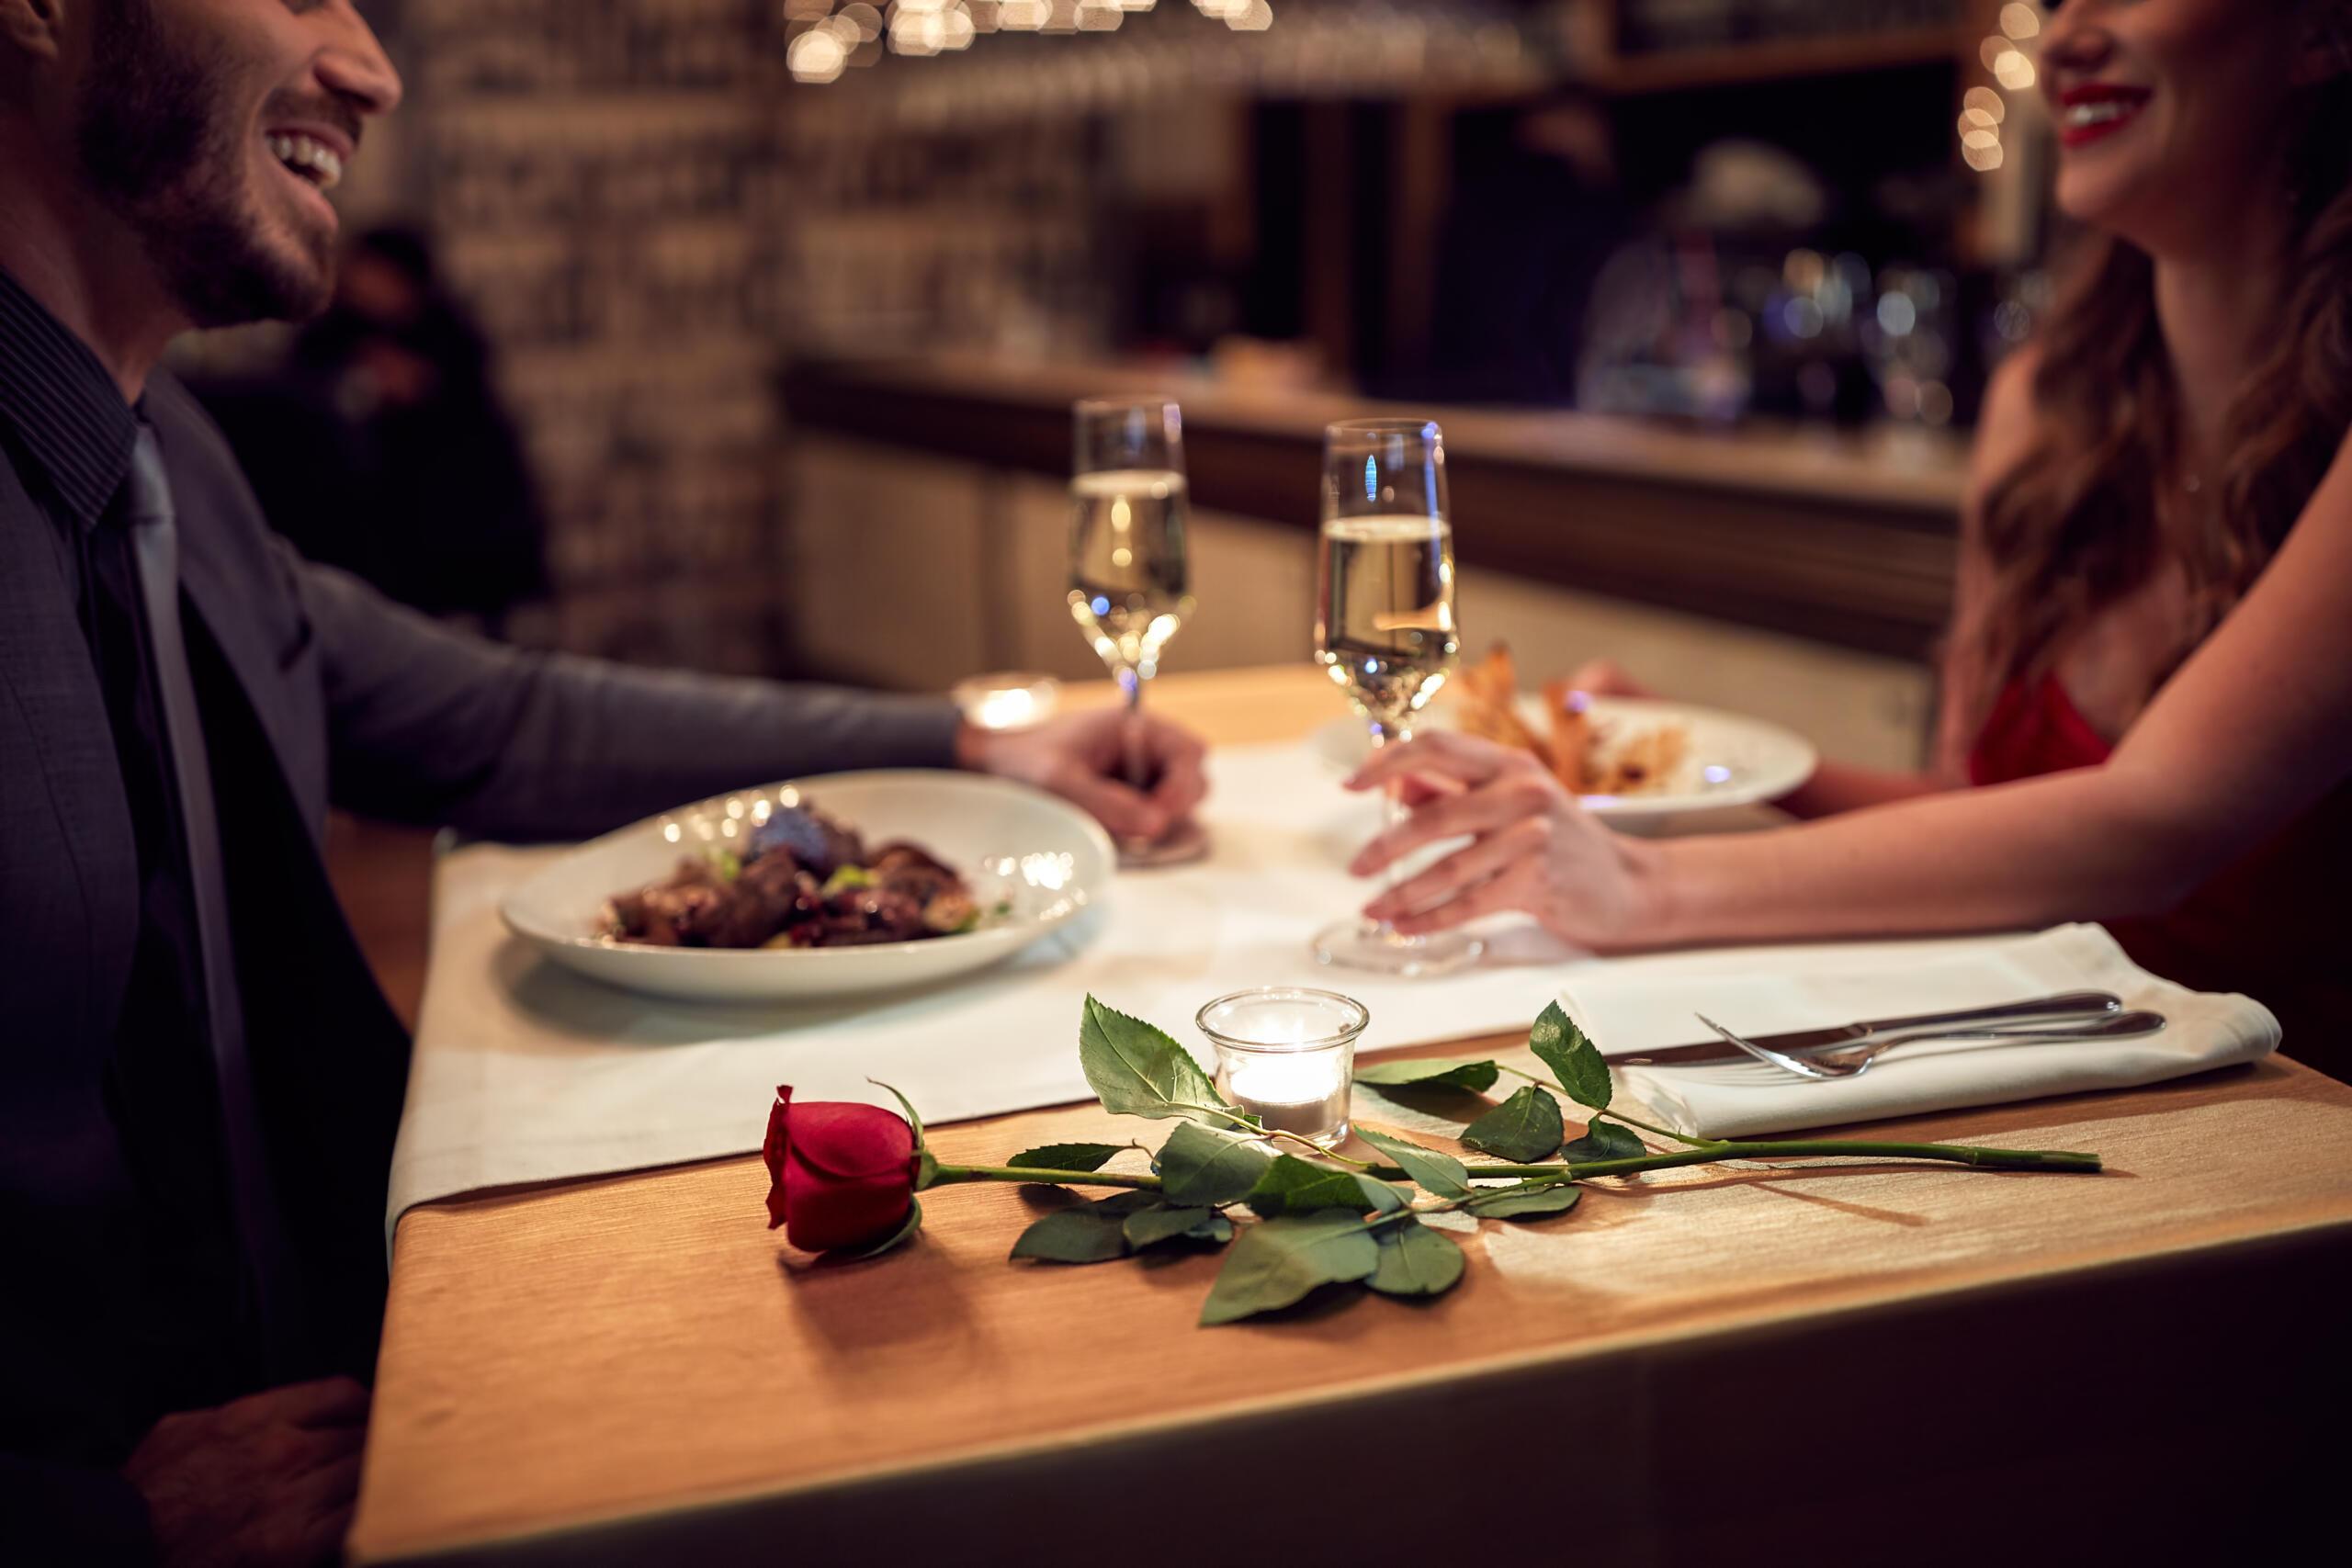 Find Your Valentine’s Day Date With These Opening Lines